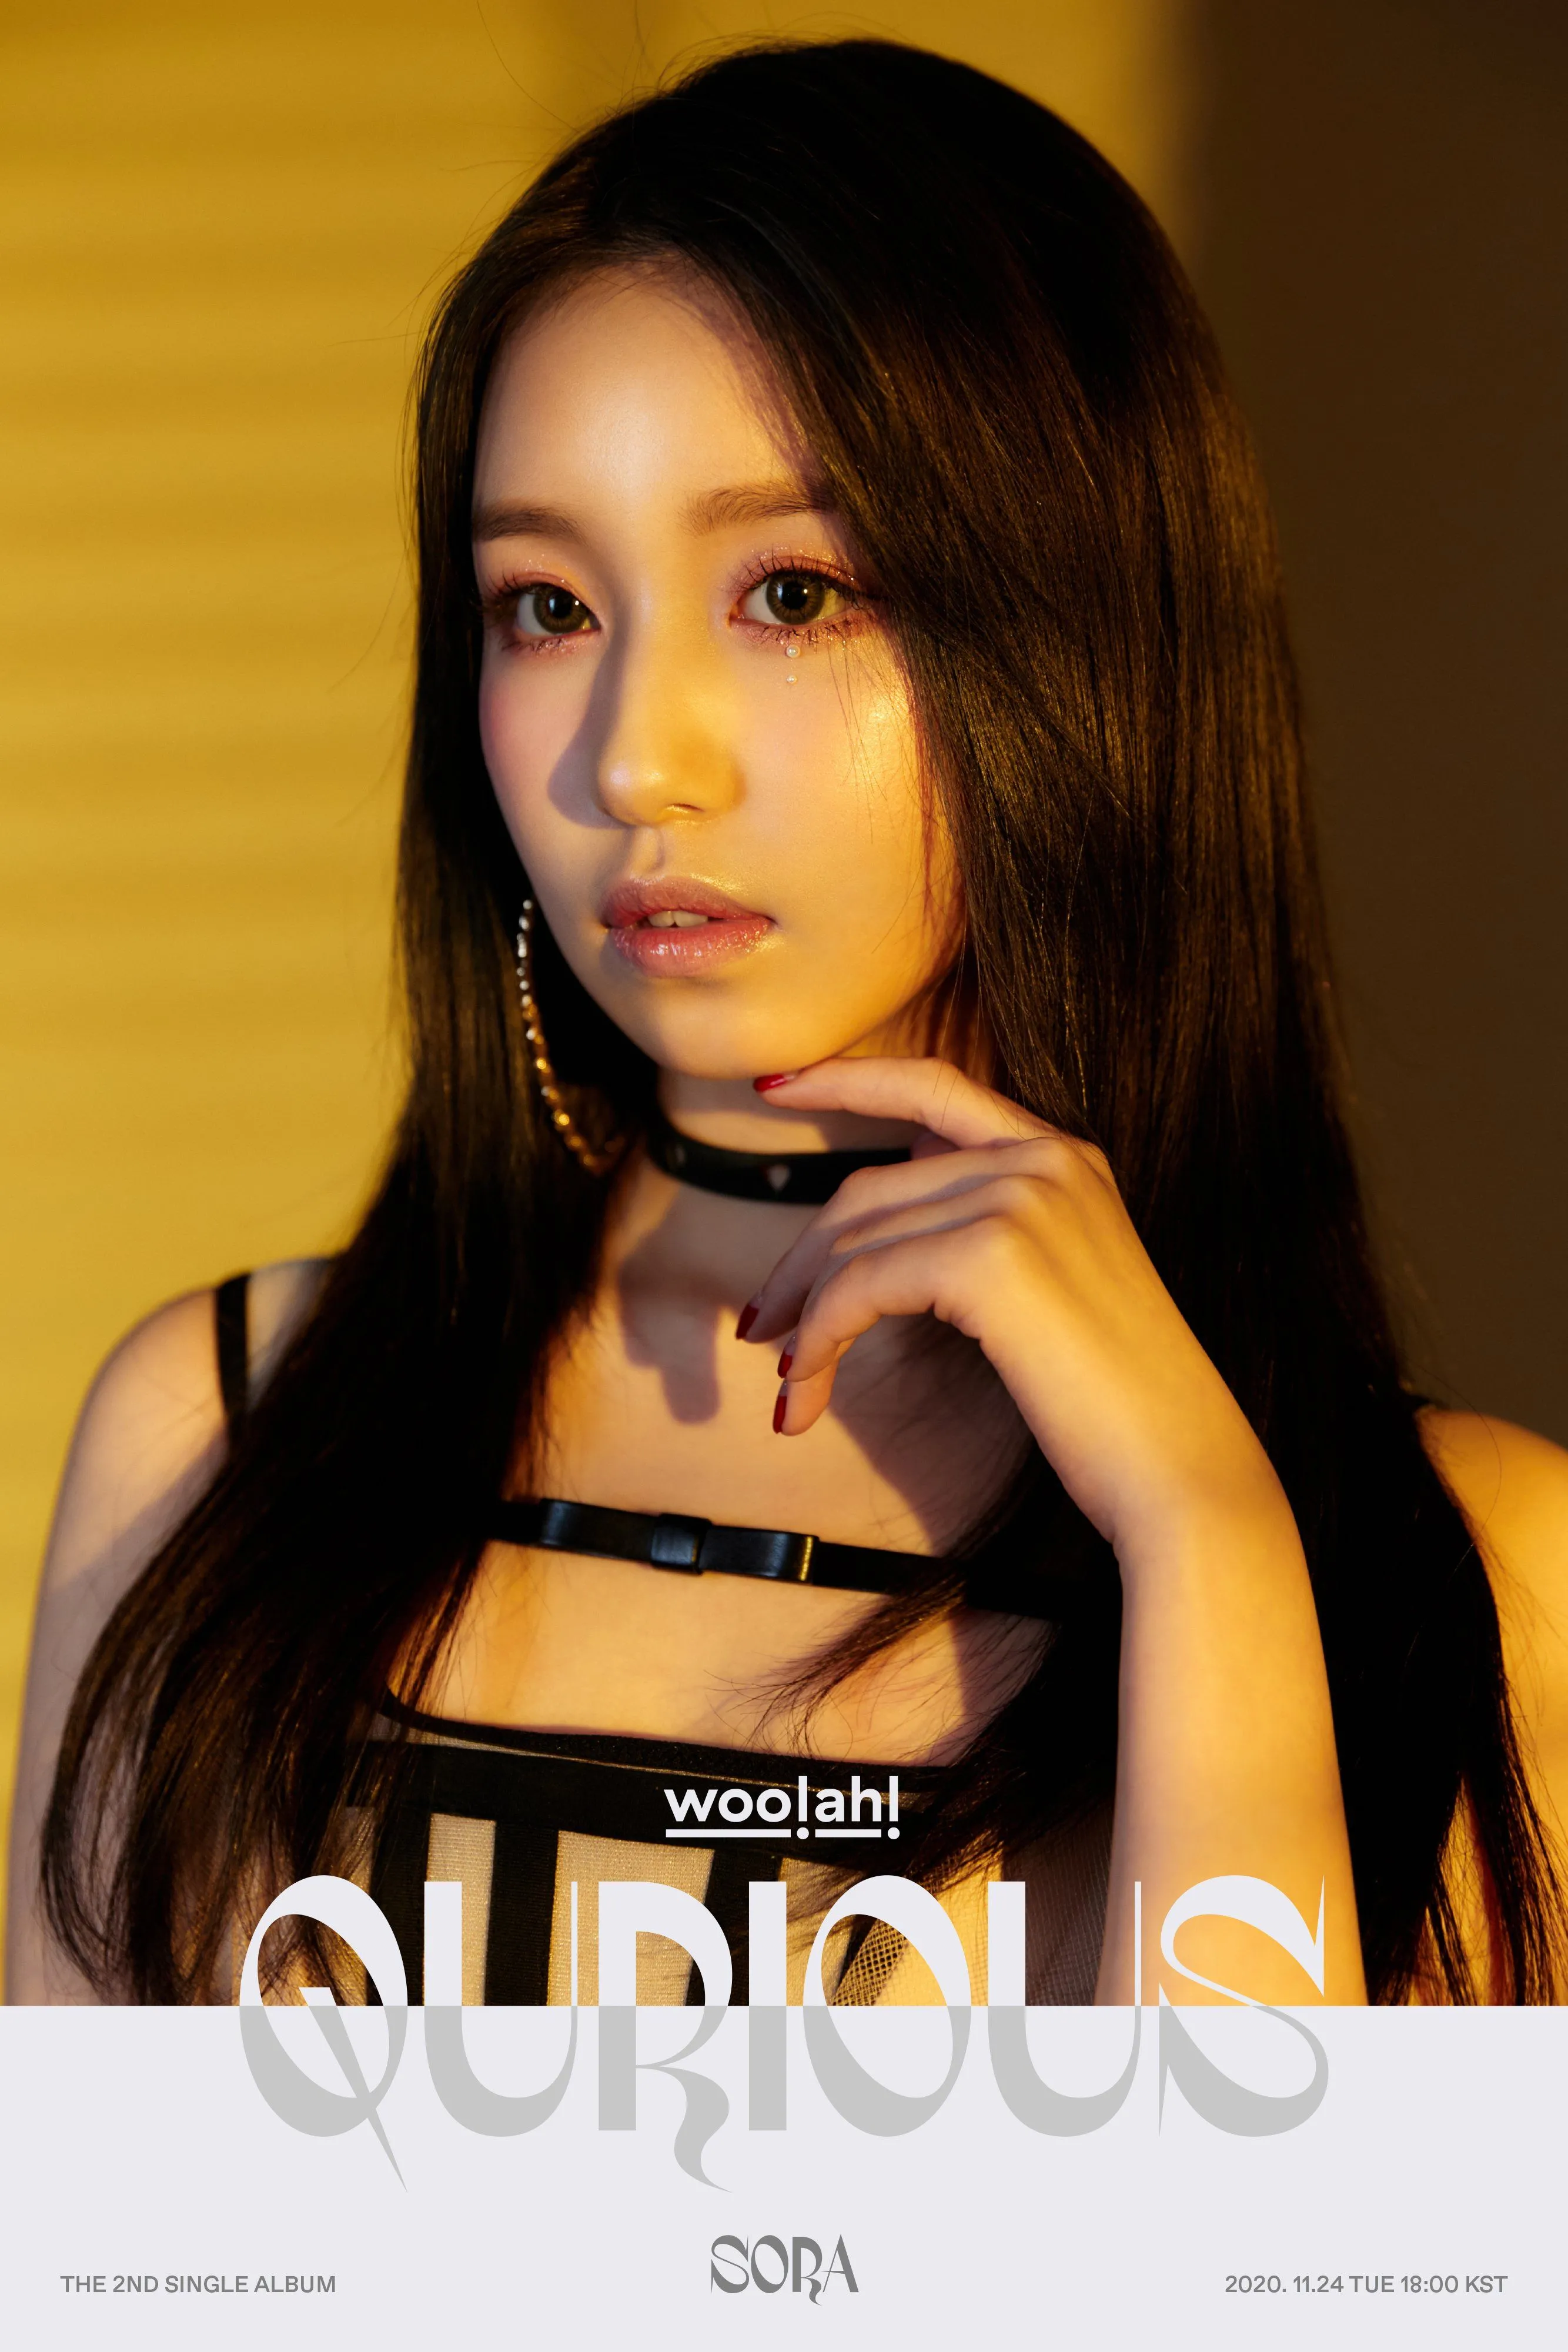 woo!ah! 2nd Single Album 'QURIOUS' Concept Teasers | kpopping